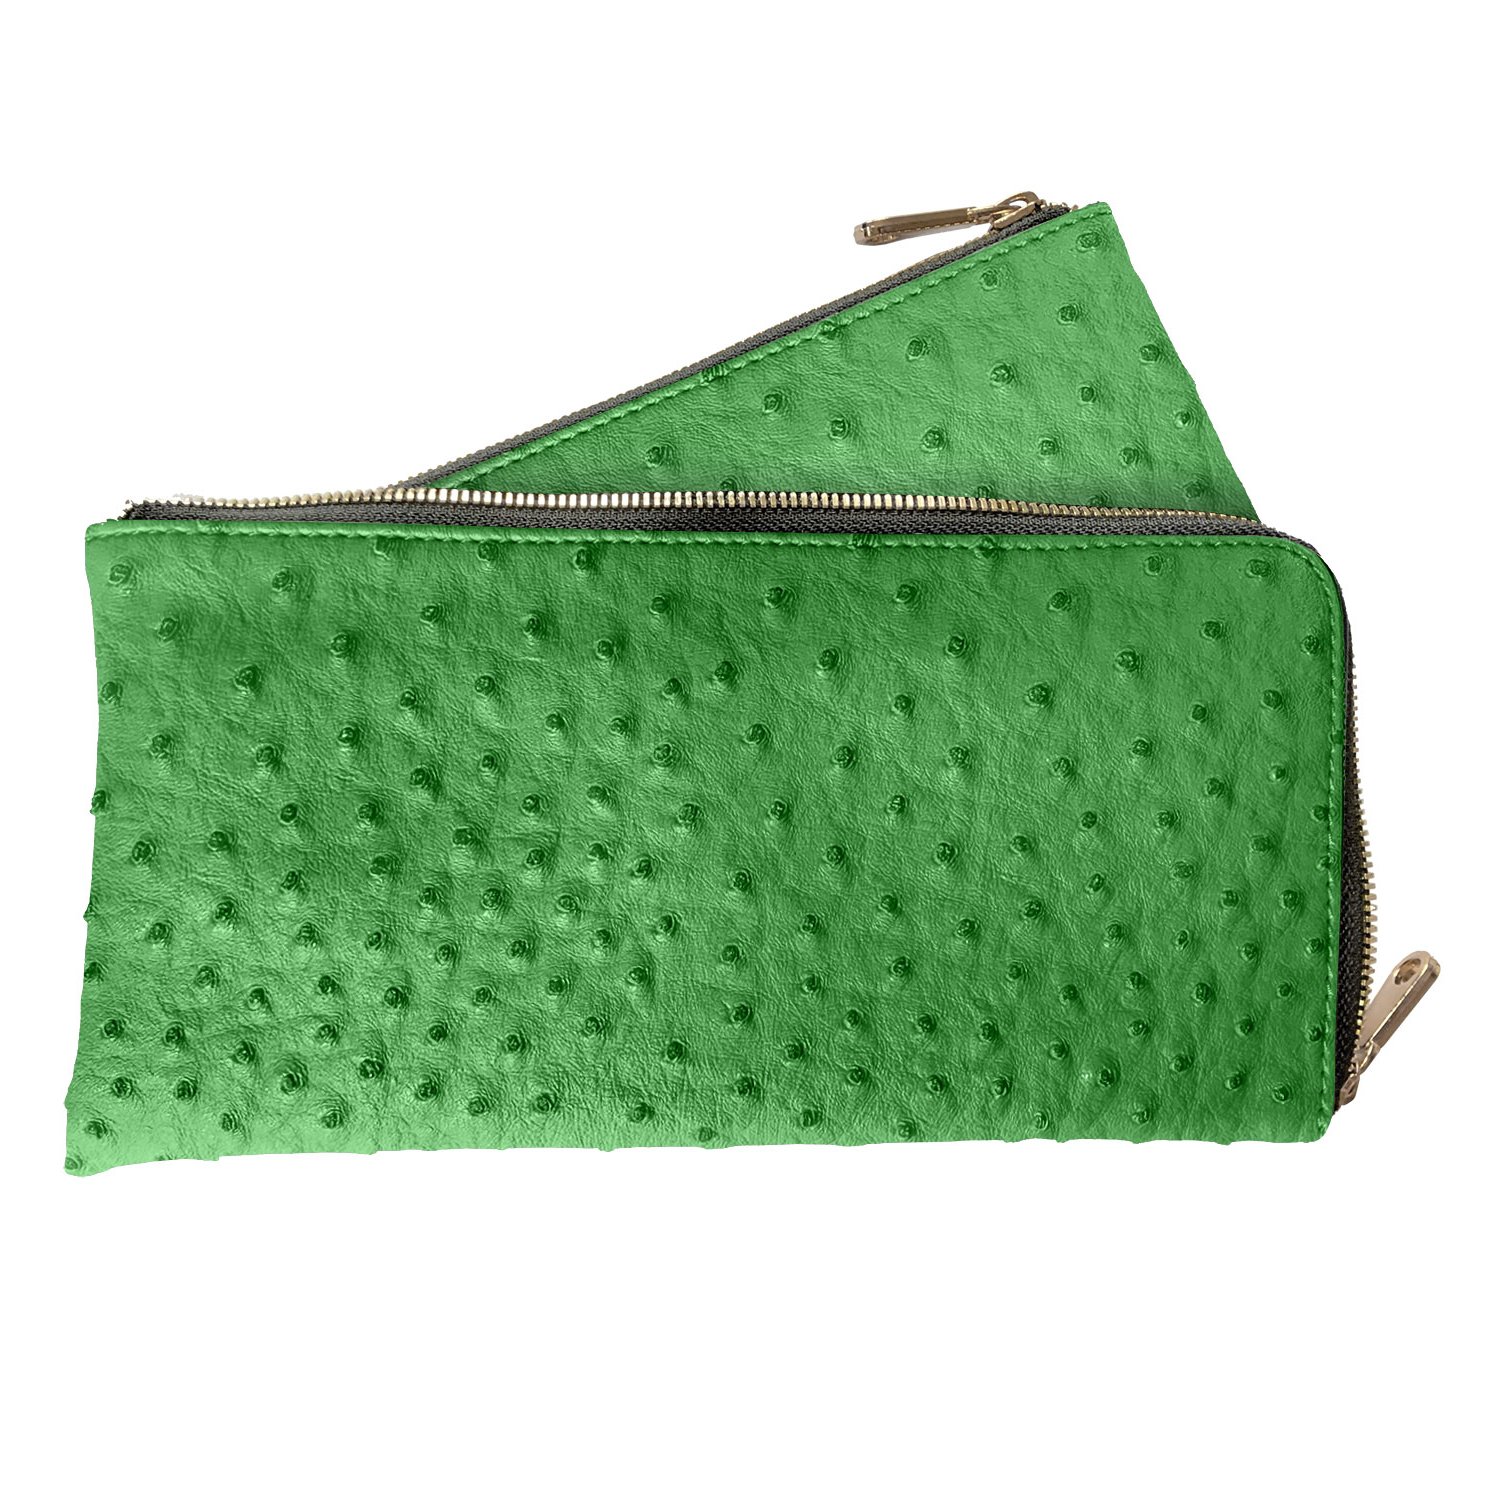 Image of Ostrich Vegan Leather Classic Purse Green